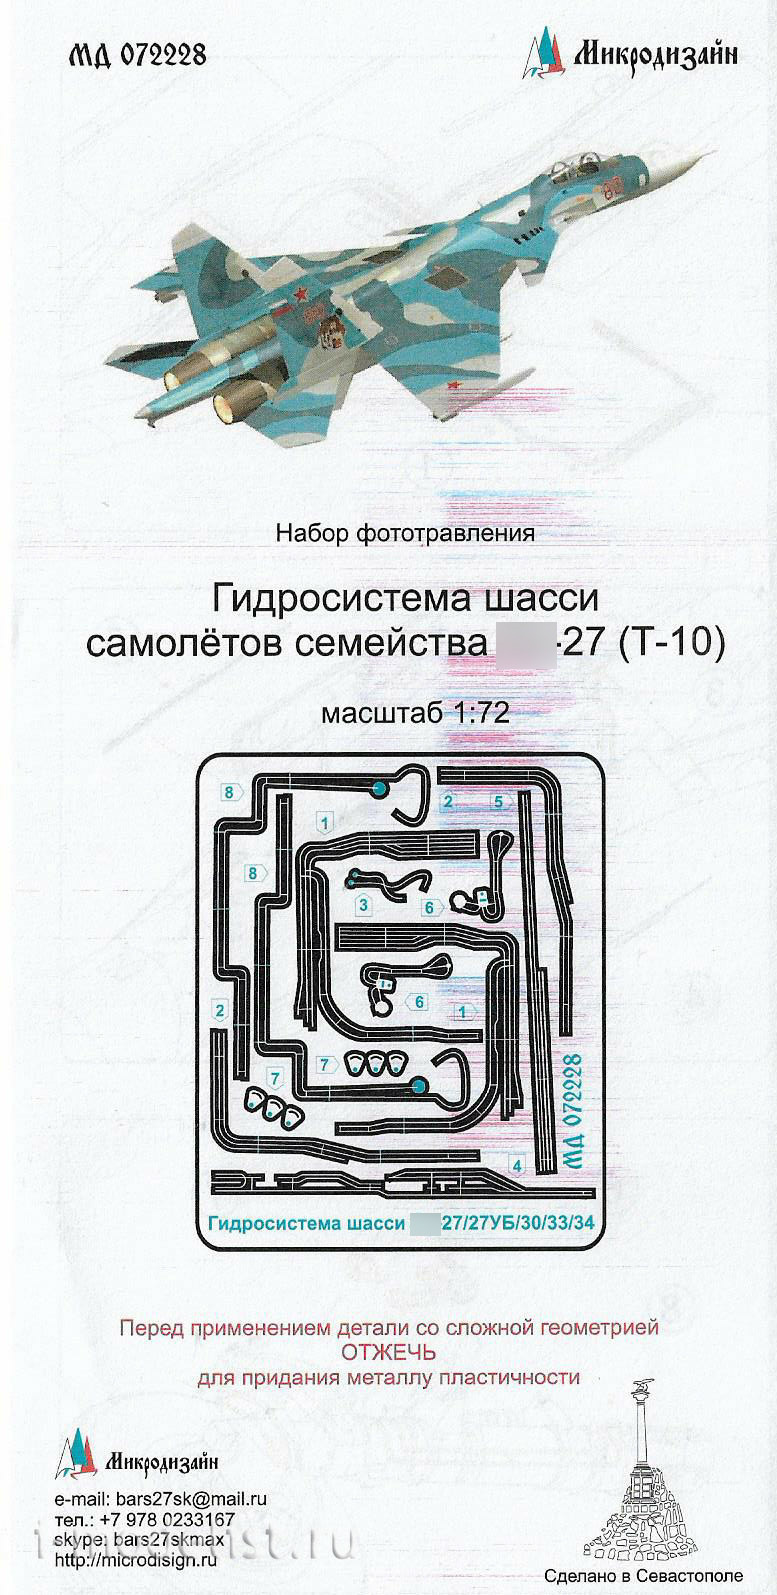 072228 Microdesign 1/72 HYDRAULIC system of the CHASSIS of the AIRCRAFT SU-27